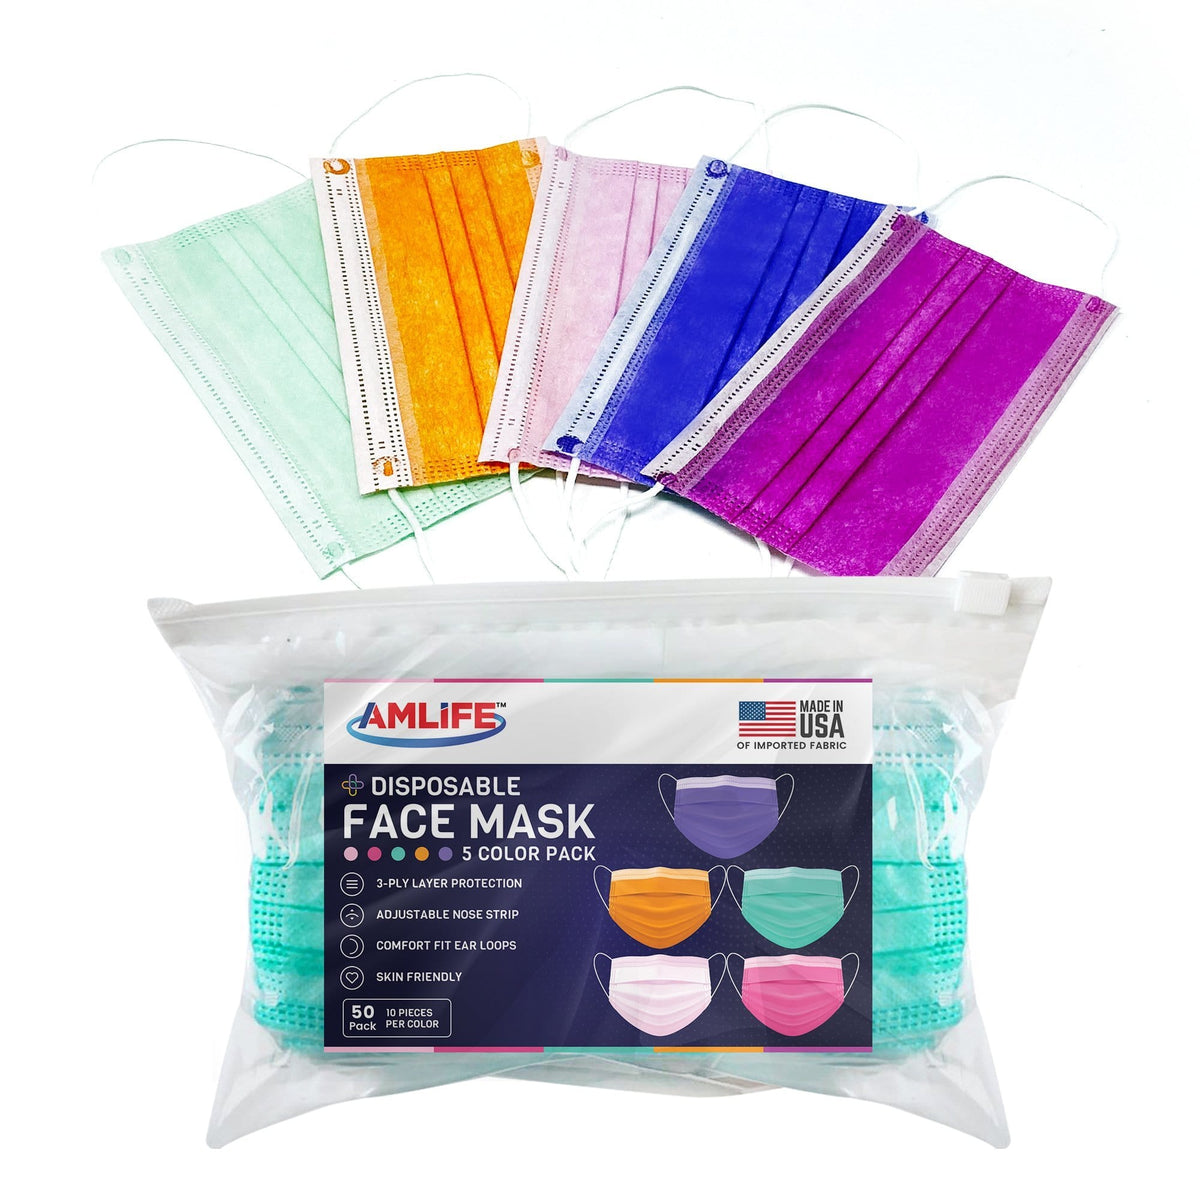 AMLIFE Face Masks 50 Pack Multi Color 3-Ply Filter Made in USA with Imported Fabric